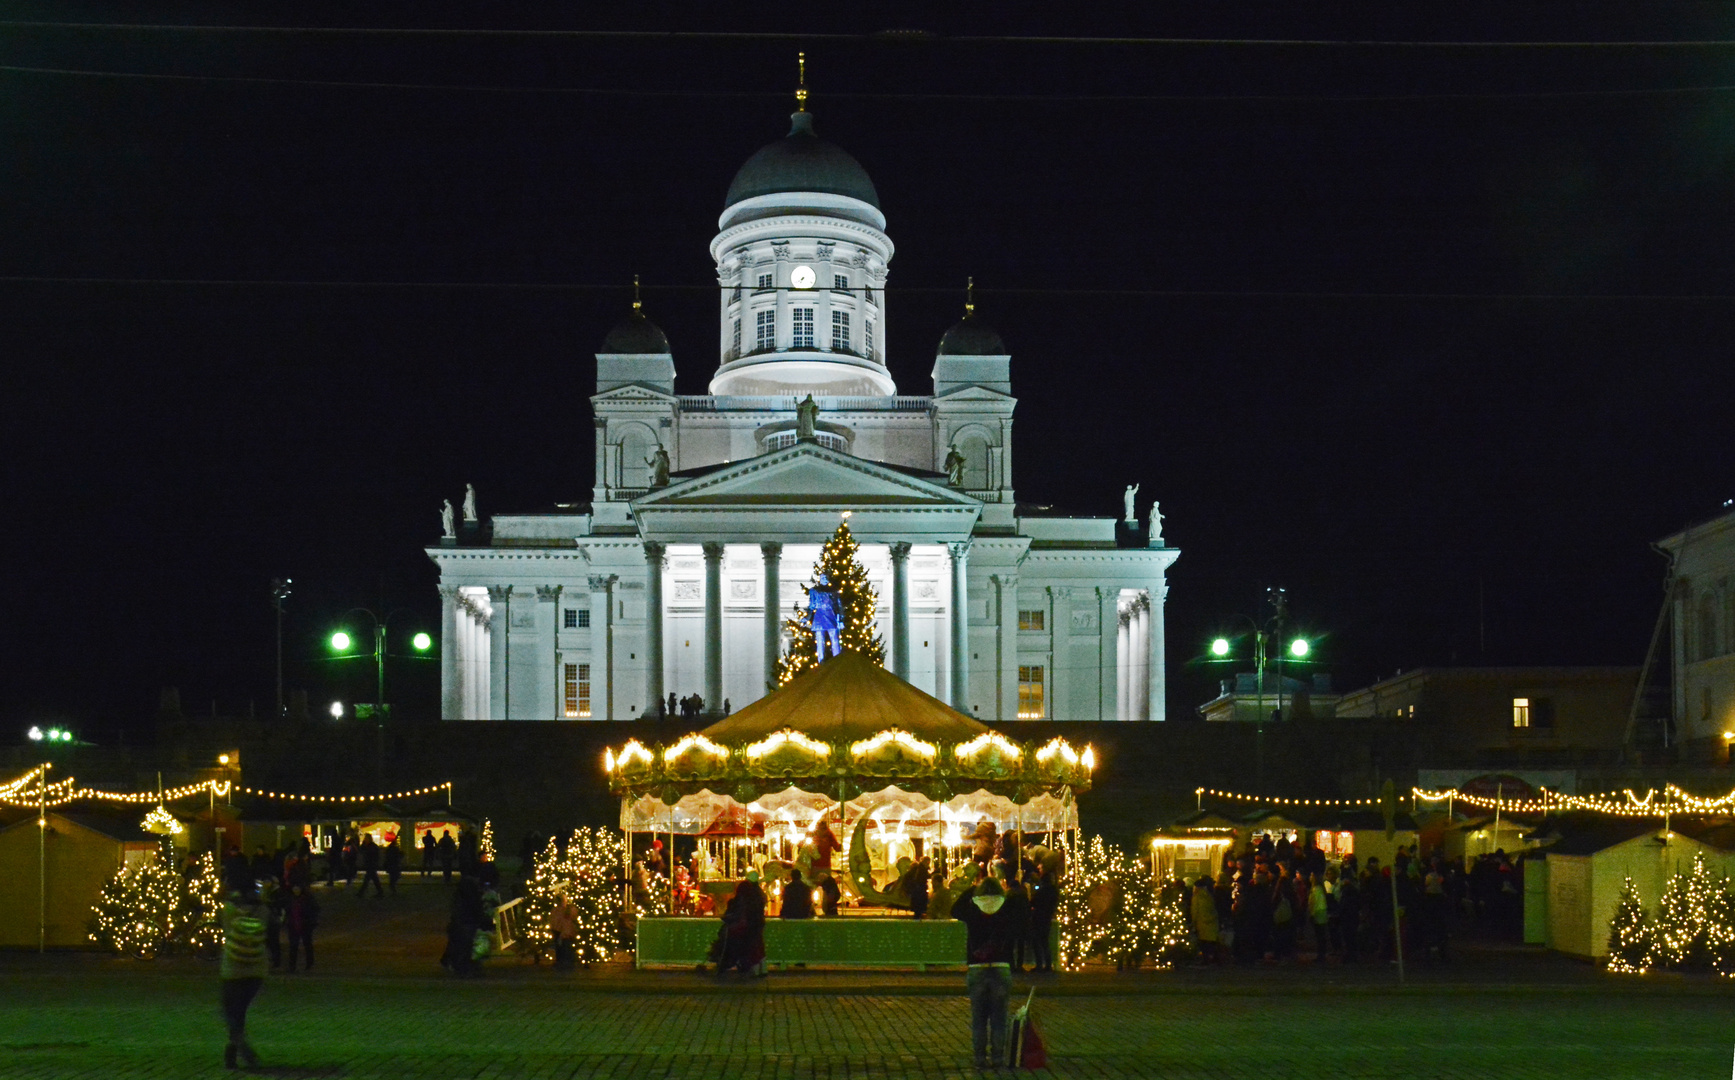 Helsinki, Christmas ligts and Lutheran cathedral